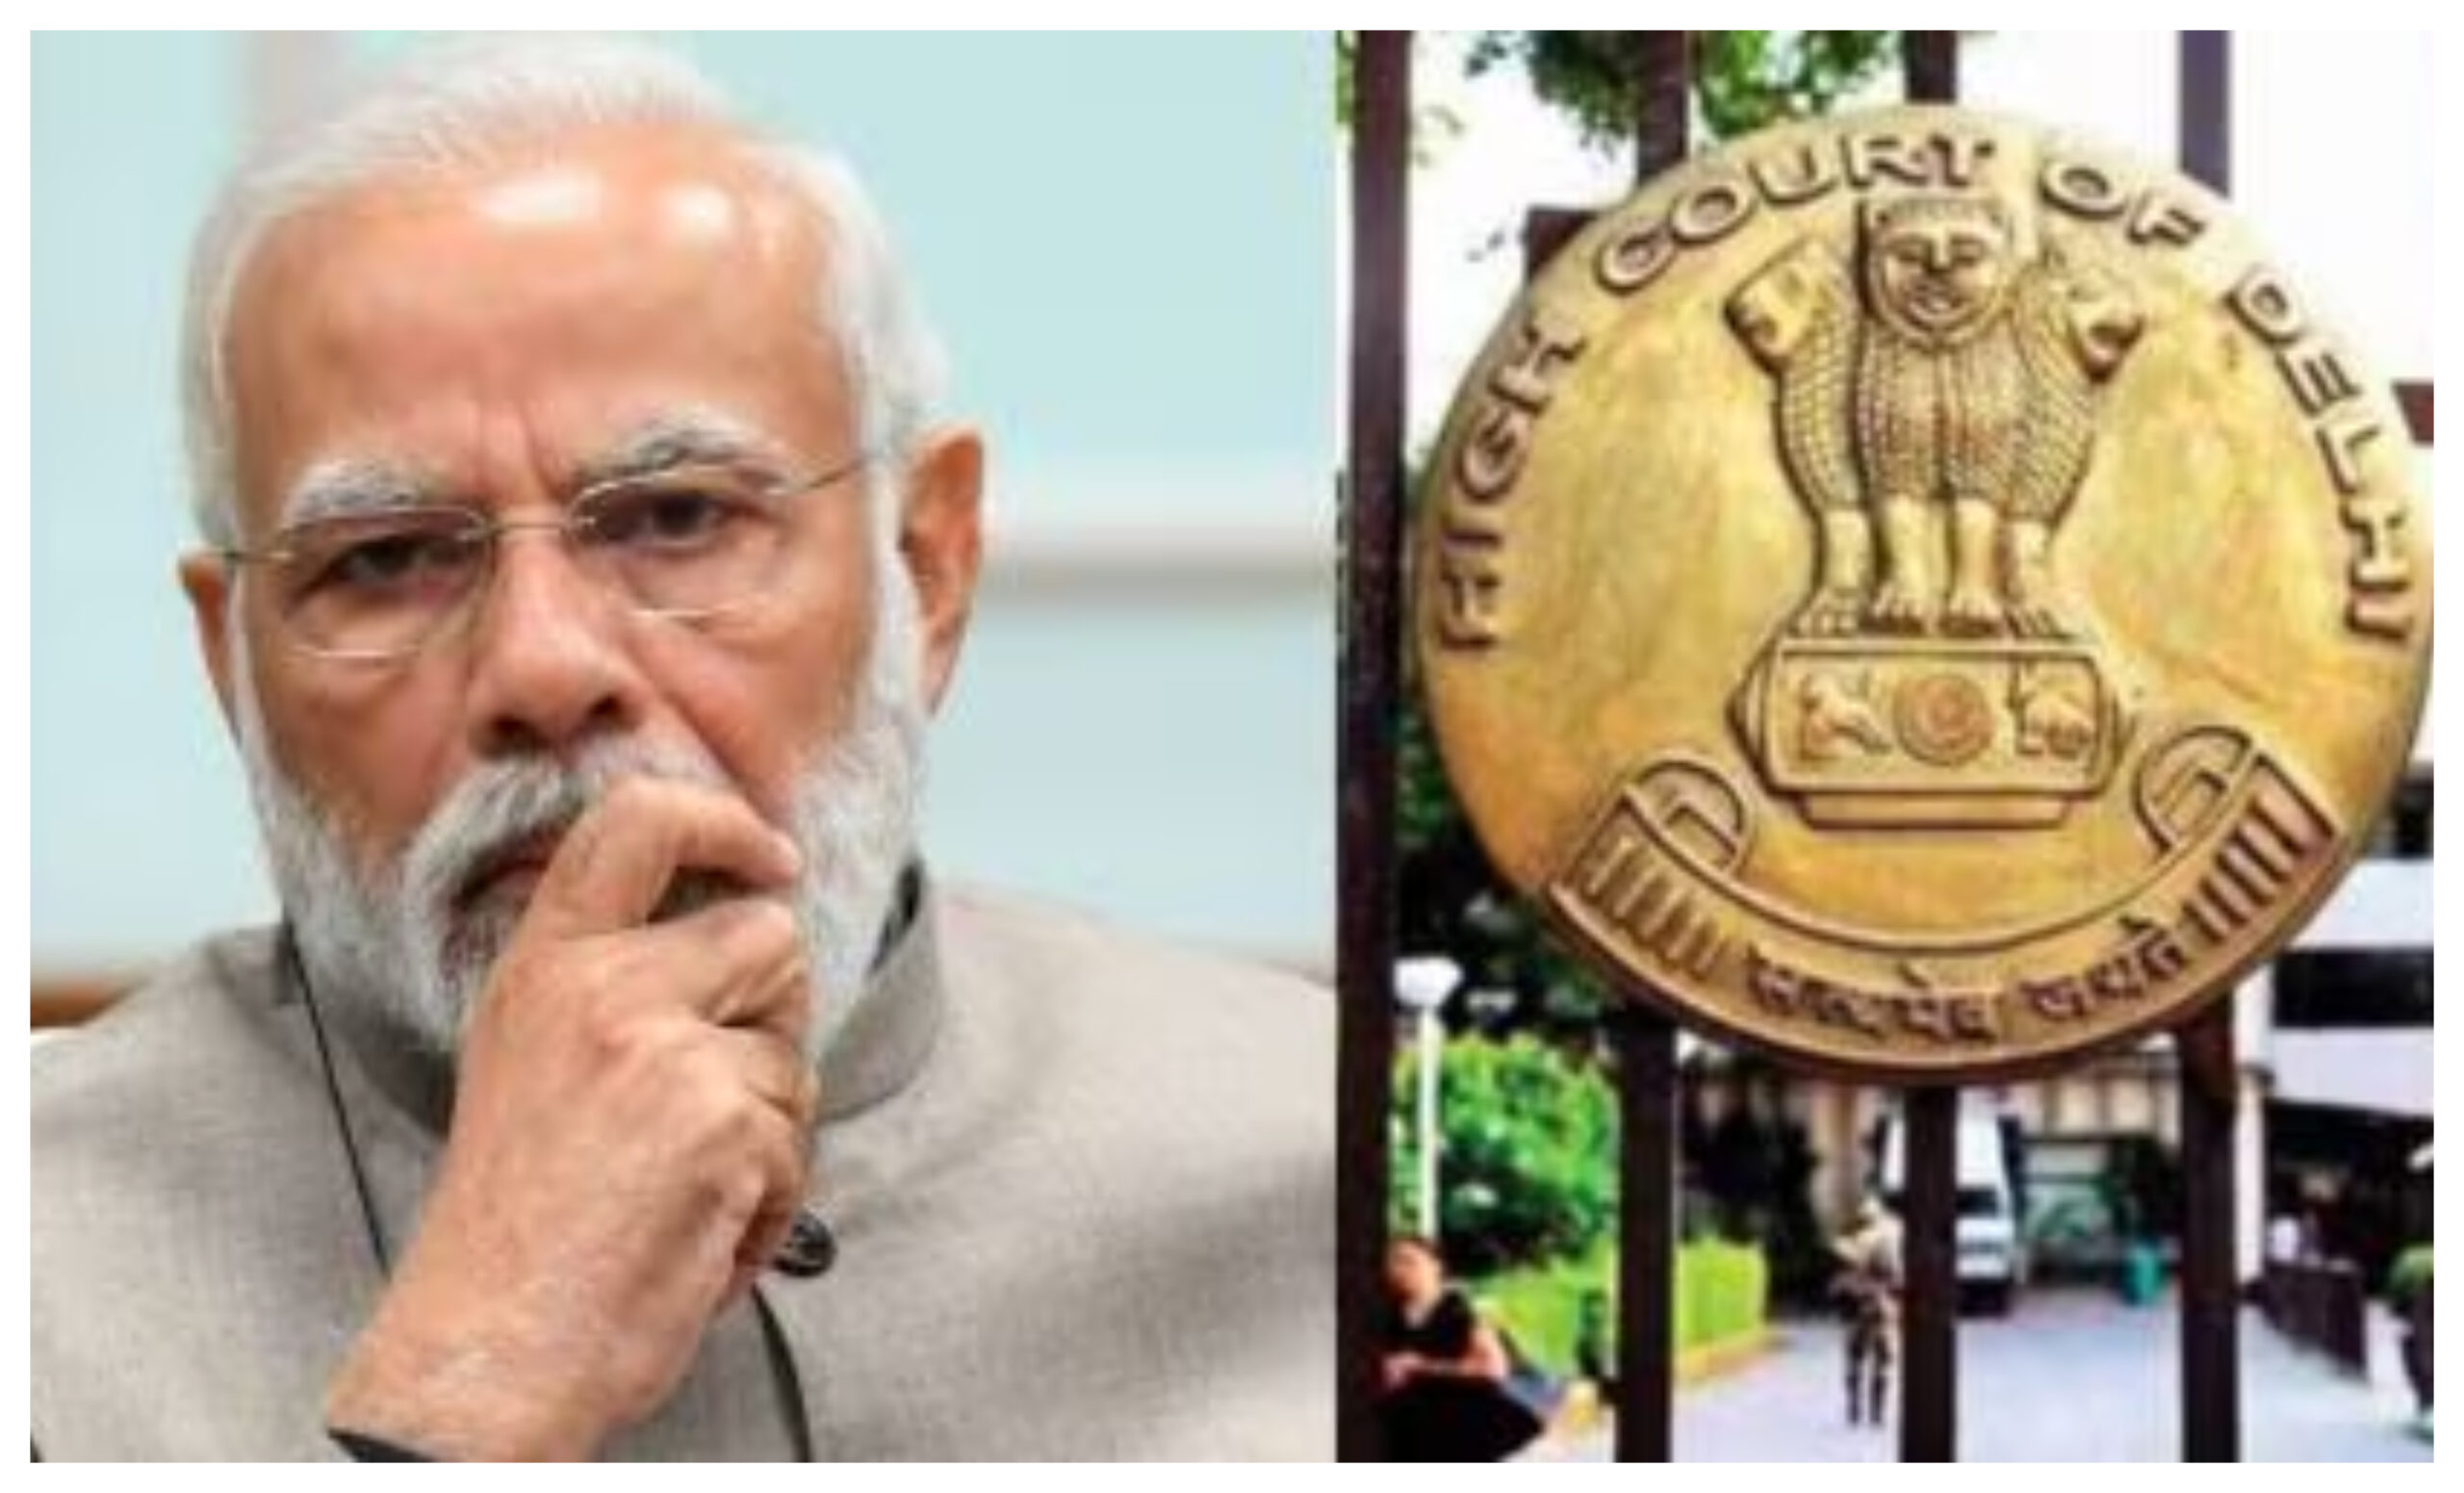 Election: Demand for action against PM Narendra Modi in Delhi HC, know the reason, petition-against-pm-modi-in-delhi-high-court in hindi news, Pm modi, delhi high court, election commission of india, lok sabha election 2024, Delhi NCR News in Hindi, Latest Delhi NCR News in Hindi, Delhi NCR Hindi Samachar